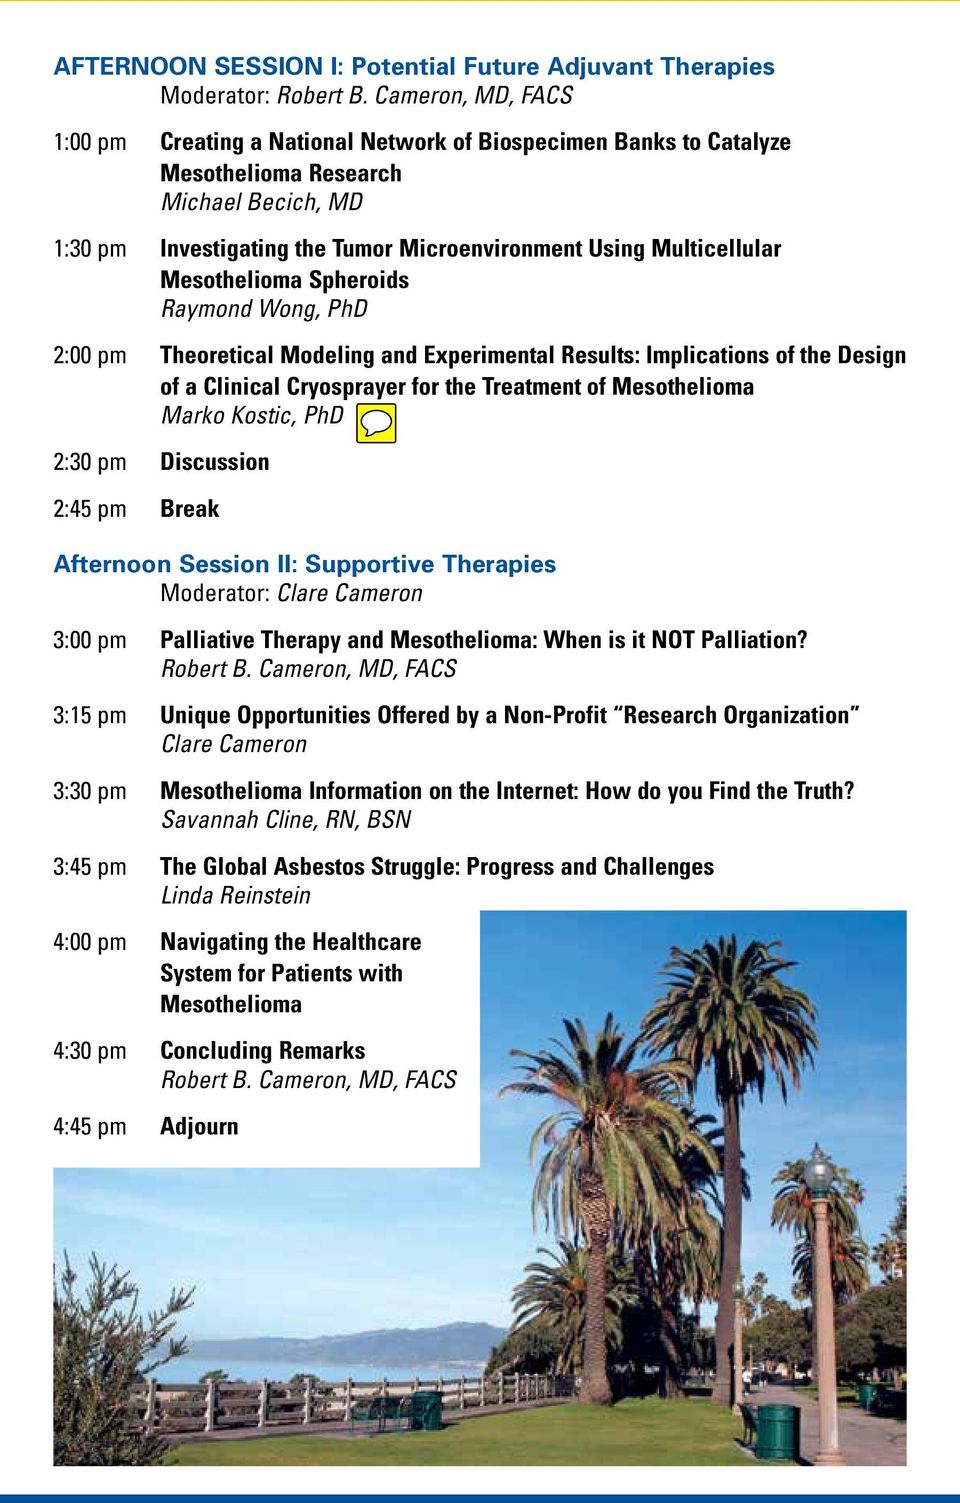 the Treatment of Mesothelioma Marko Kostic, PhD 2:30 pm Discussion 2:45 pm Break Afternoon Session II: Supportive Therapies Moderator: Clare Cameron 3:00 pm Palliative Therapy and Mesothelioma: When